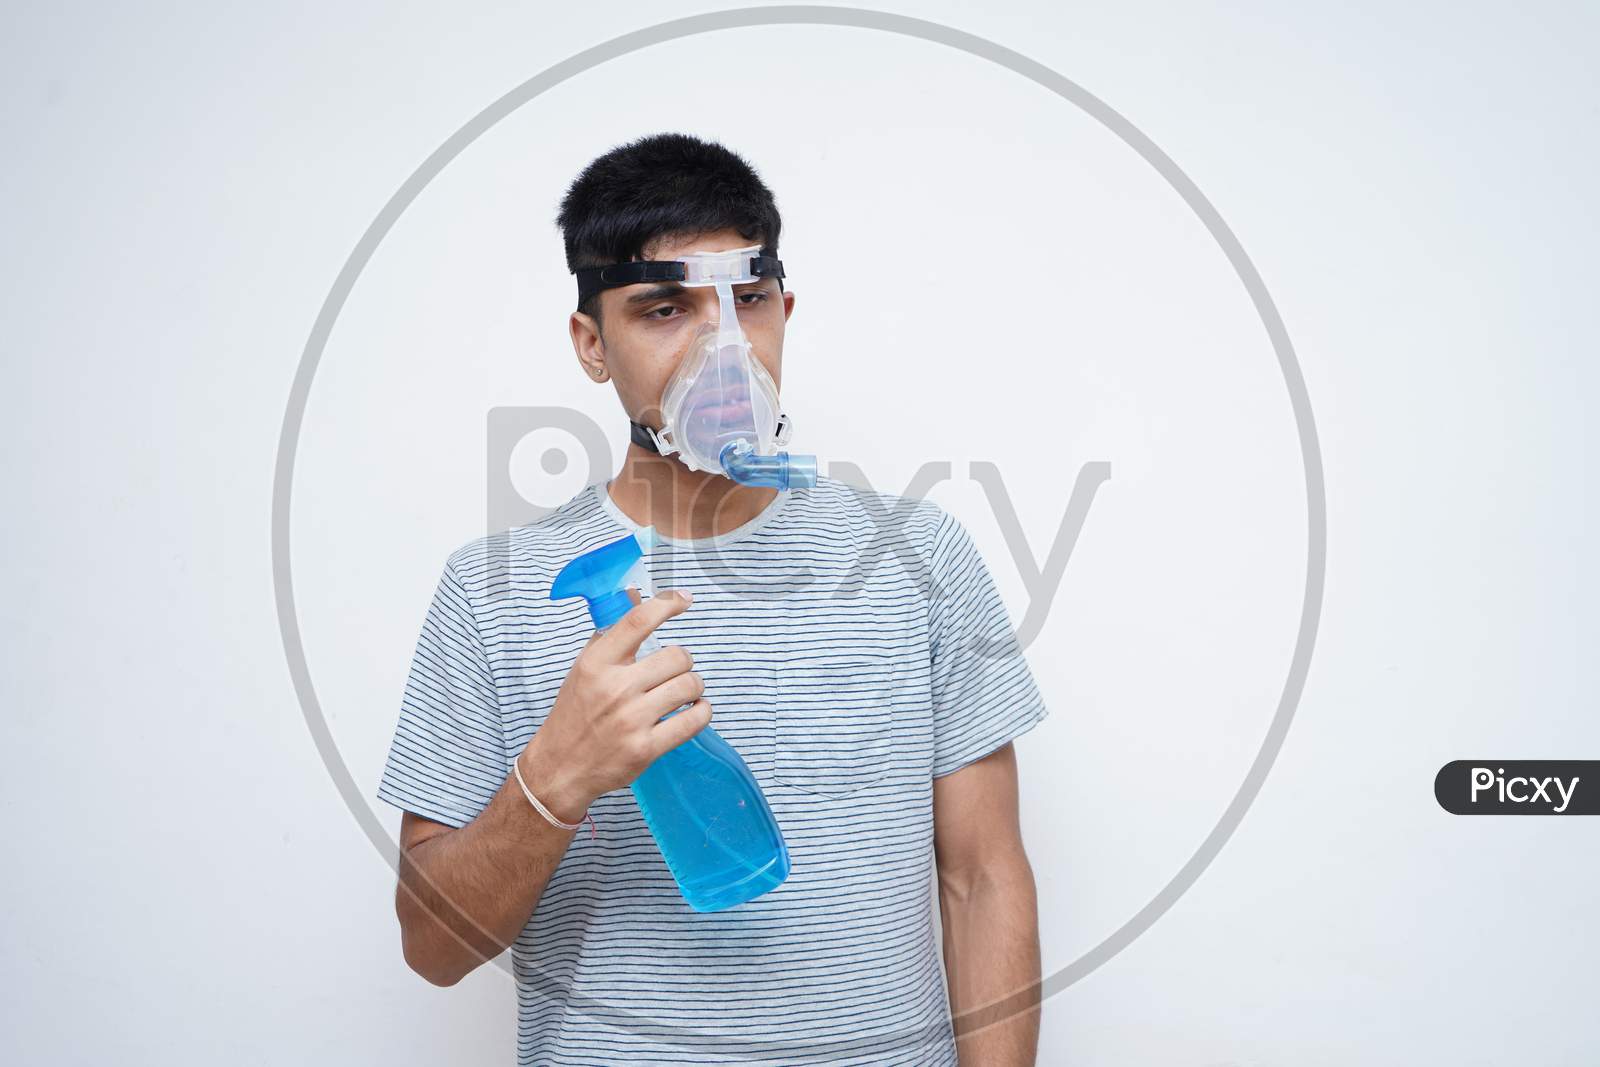 Young Asian Teen Boy Using Sanitizer While Wearing Oxygen Mask.